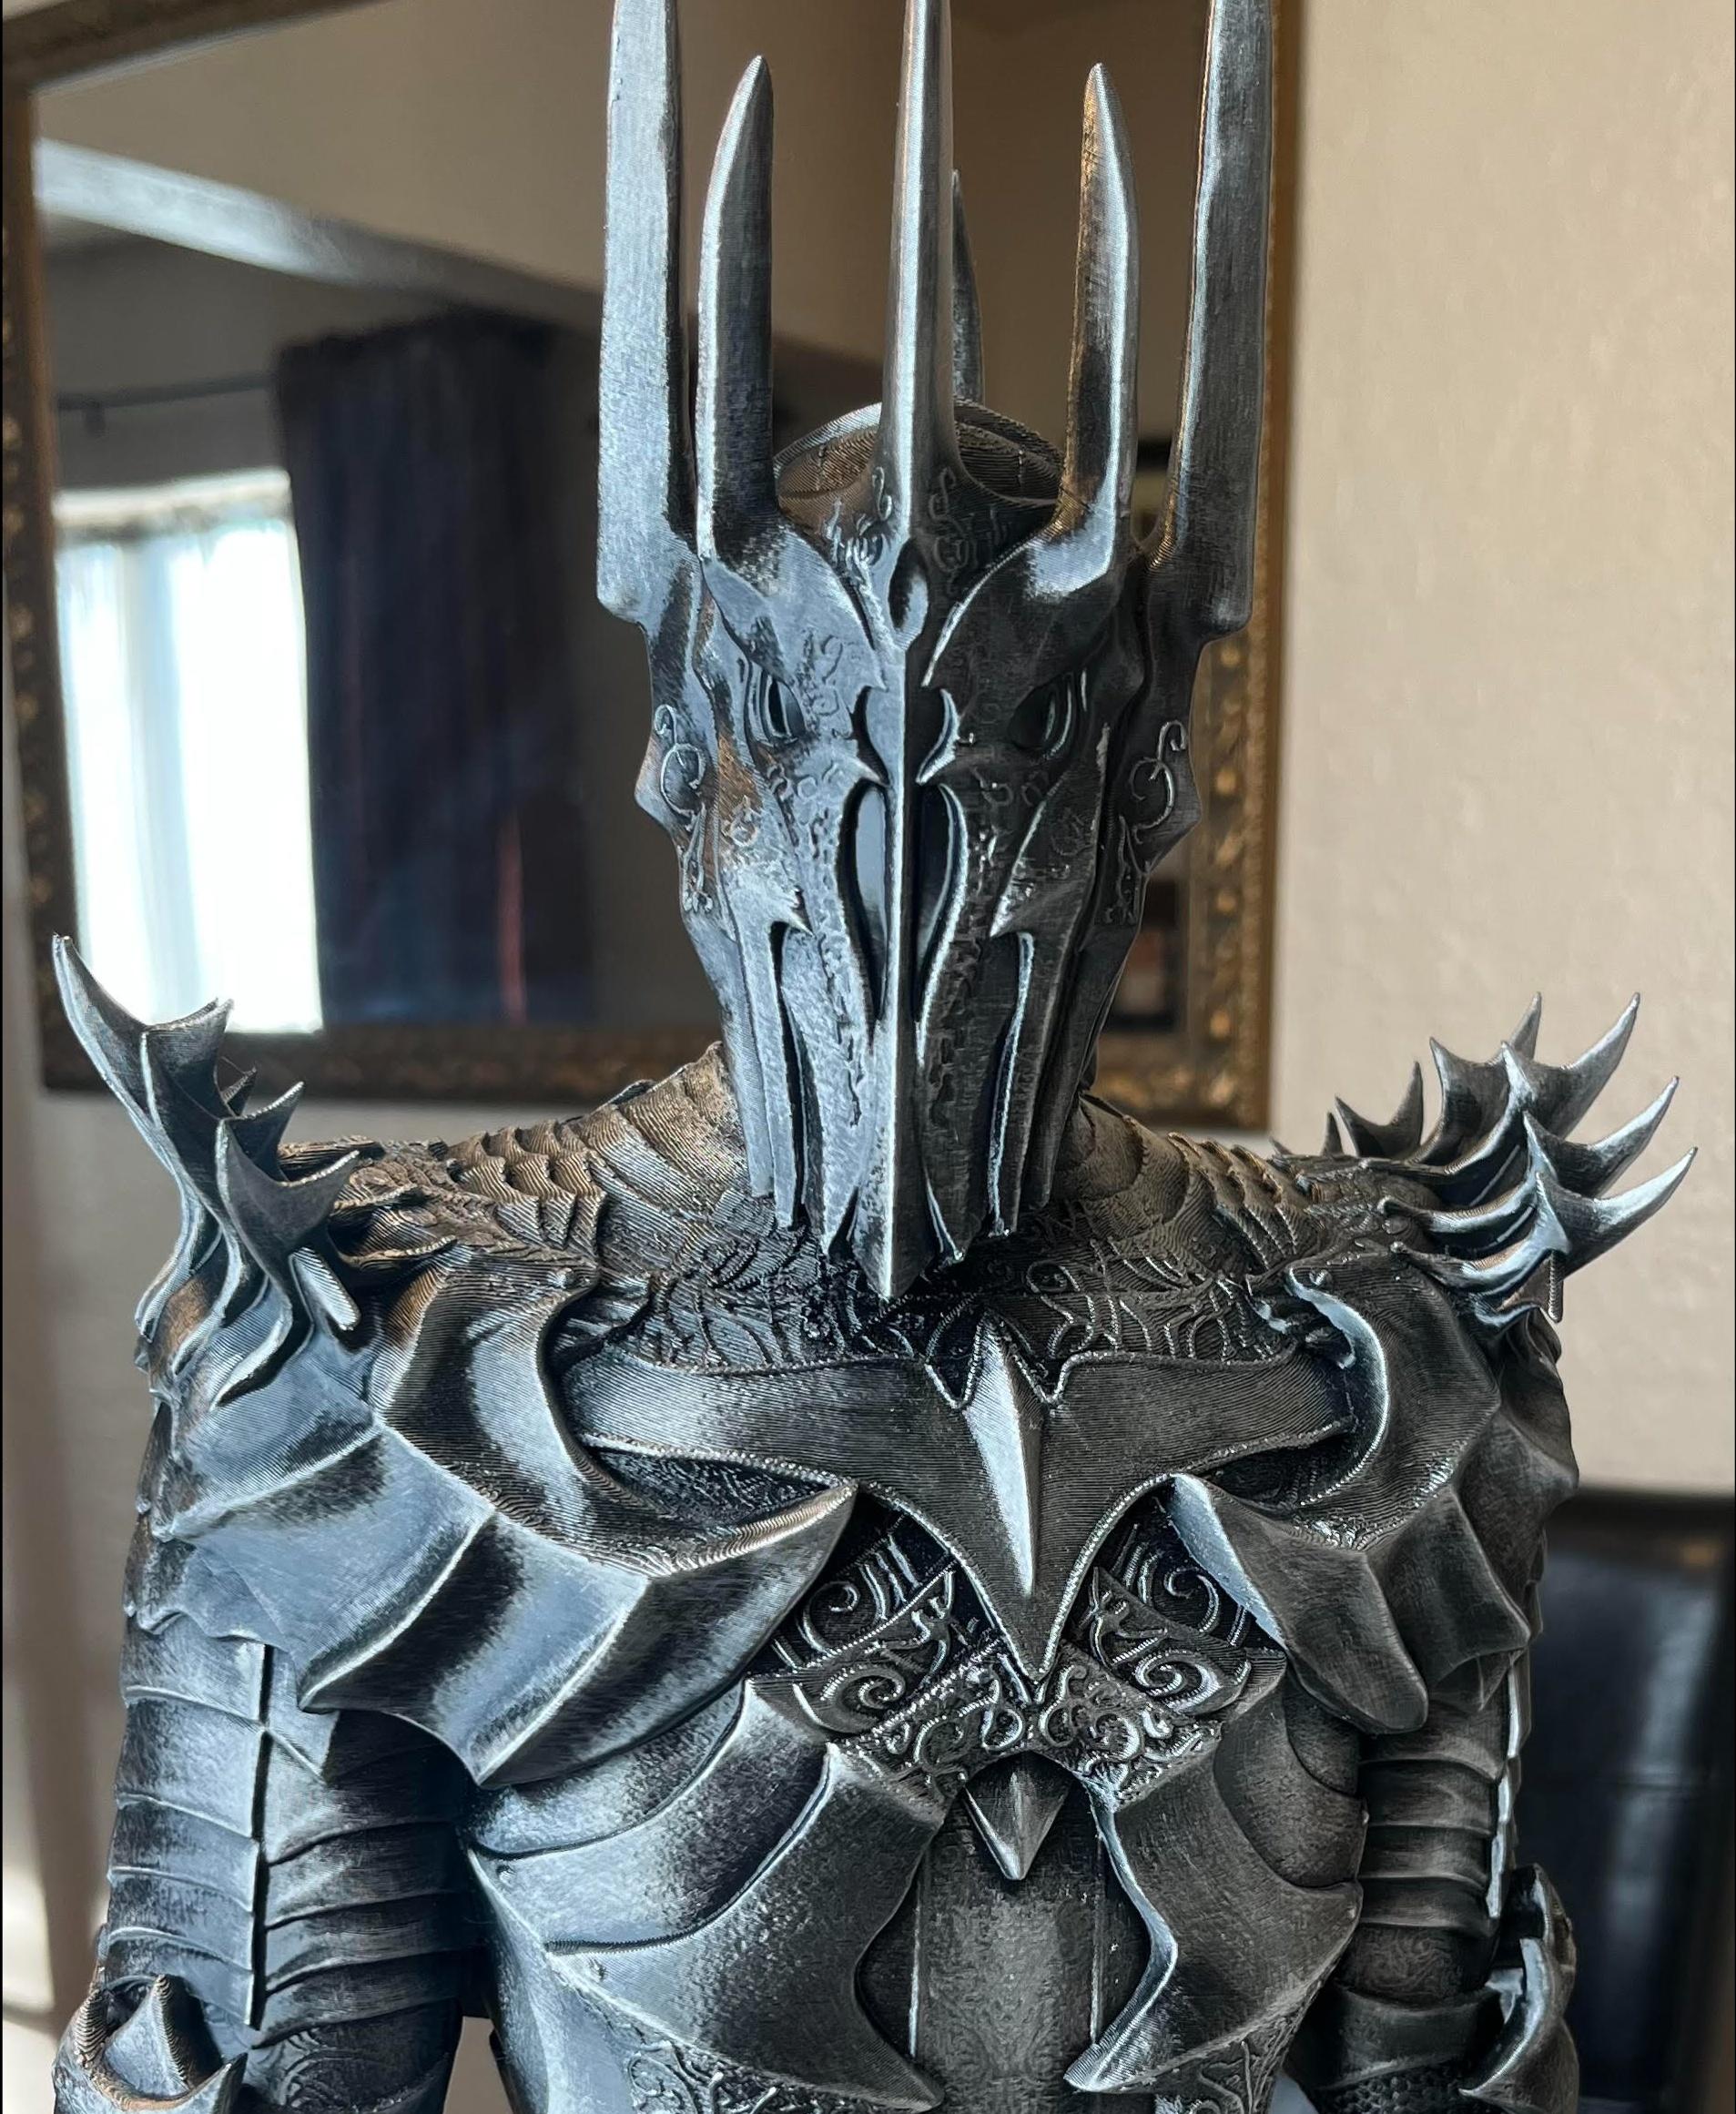 Sauron (Pre Supported) 3d model